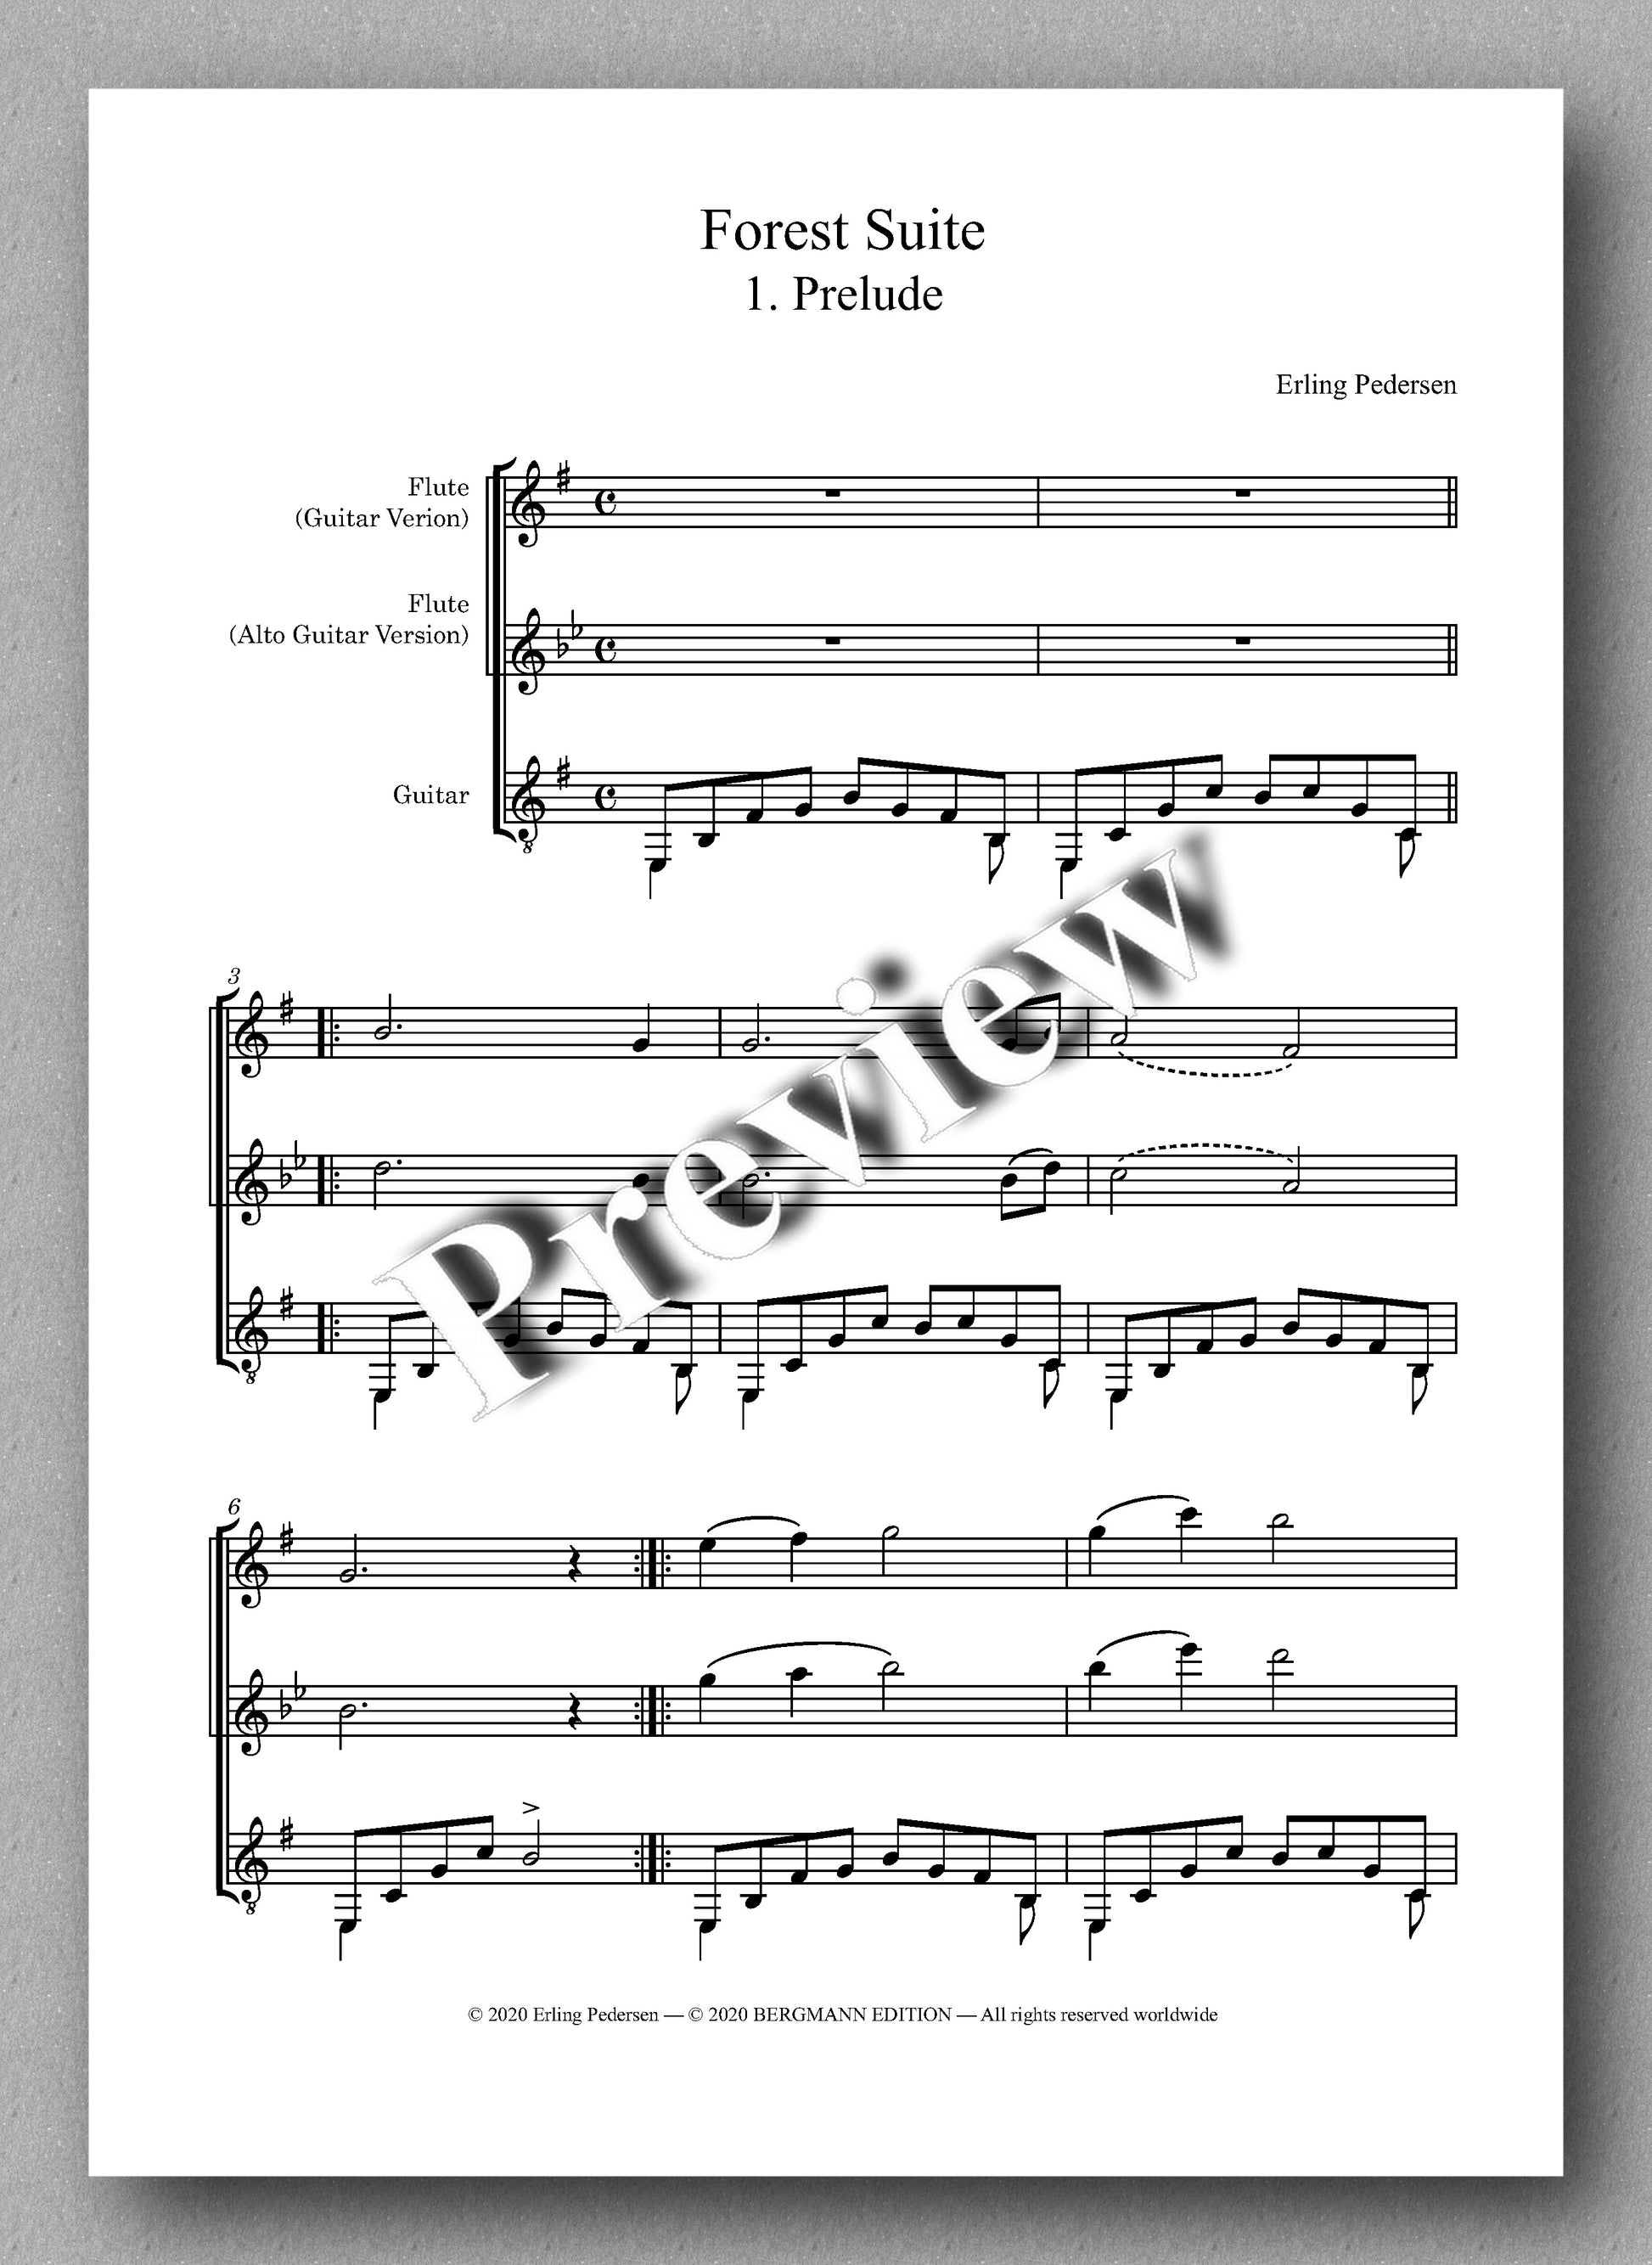 Pedersen, Forest Suite - preview of the music score 1